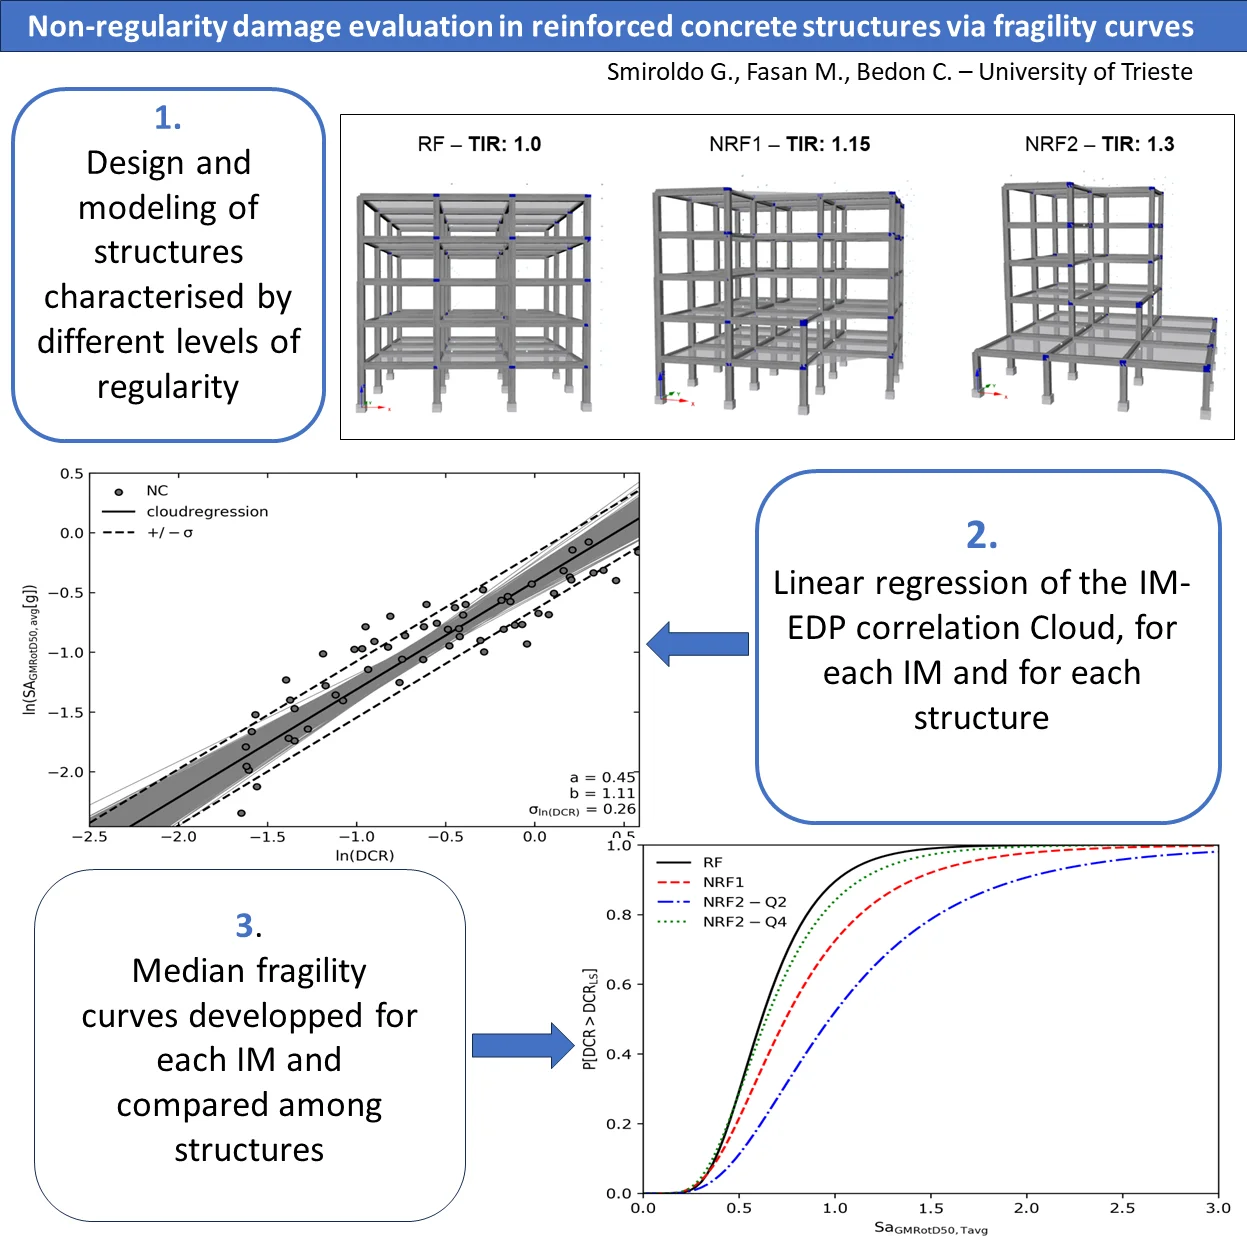 Non-regularity damage evaluation in reinforced concrete structures via fragility curves